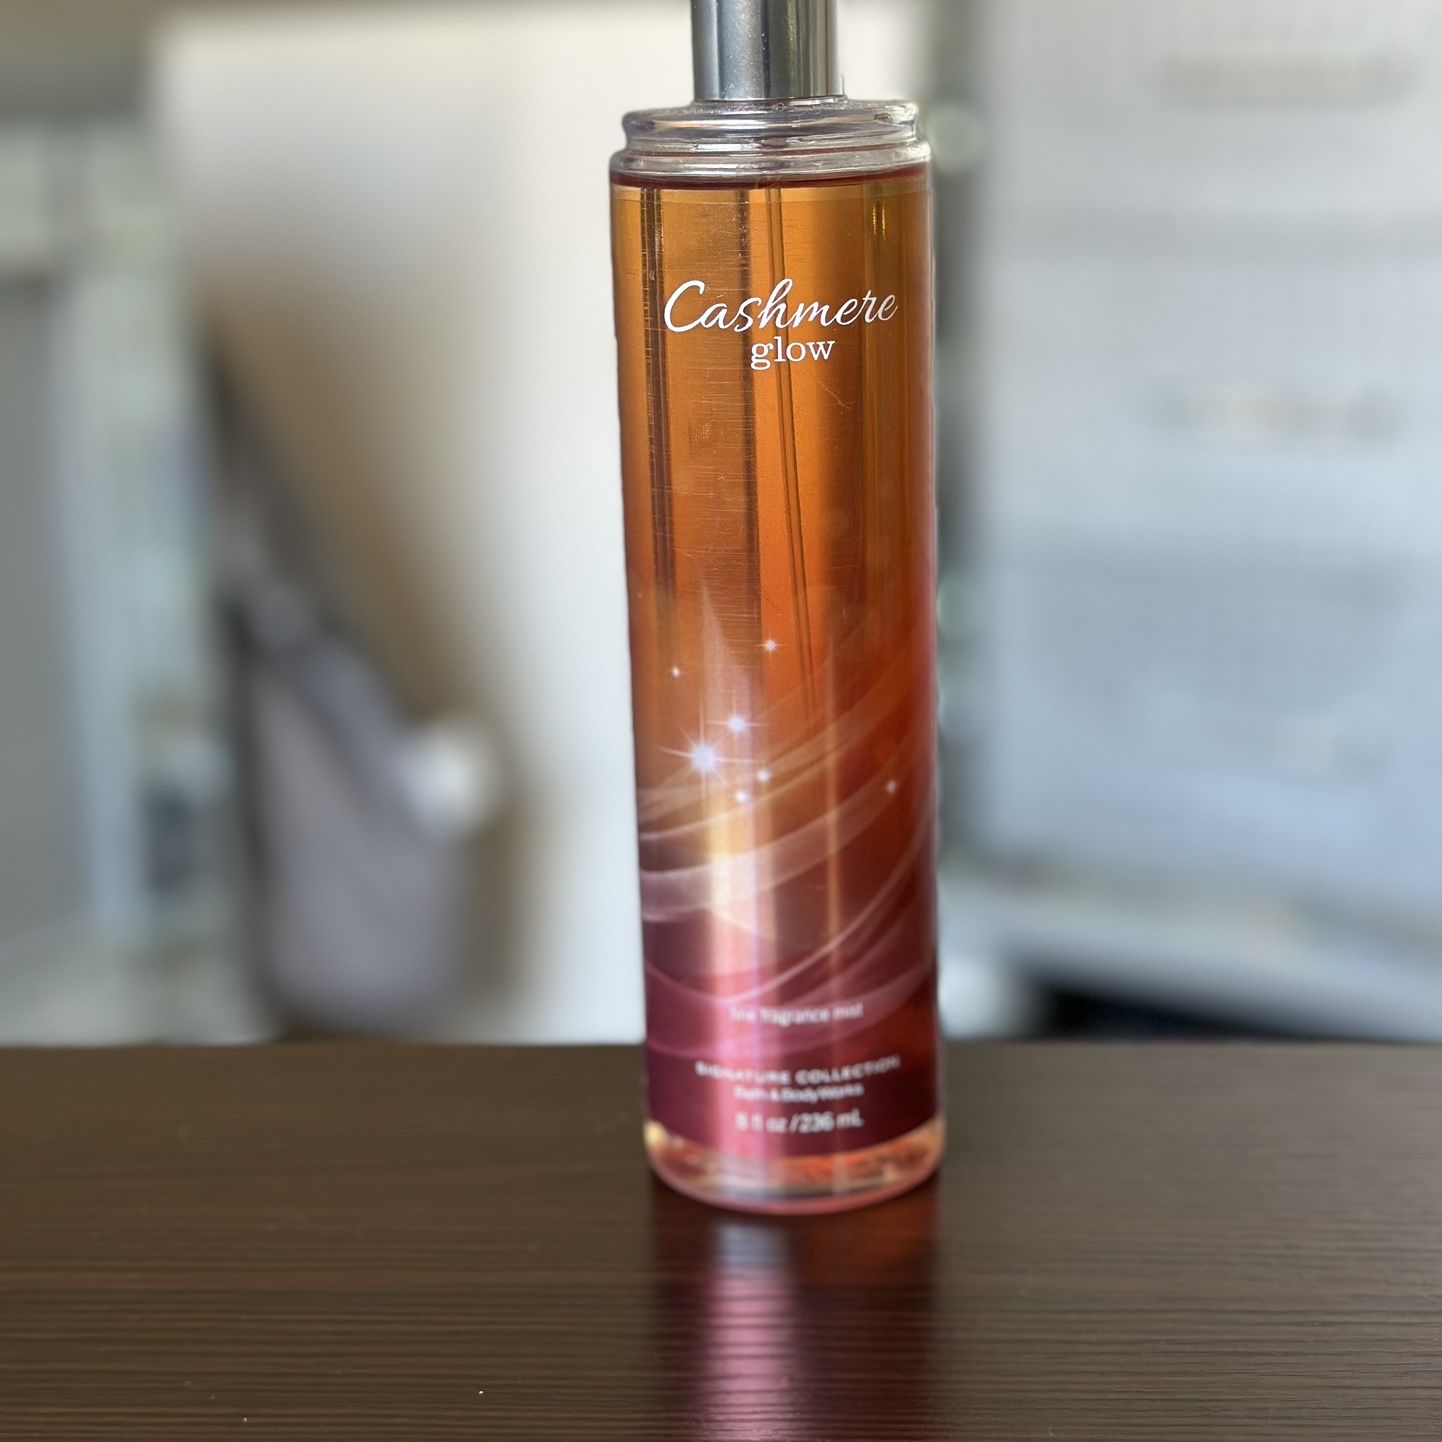  Cashmere Glow Mist - Inspired by Cashmere Glow by Bath and Body  Works, Long Lasting Scent